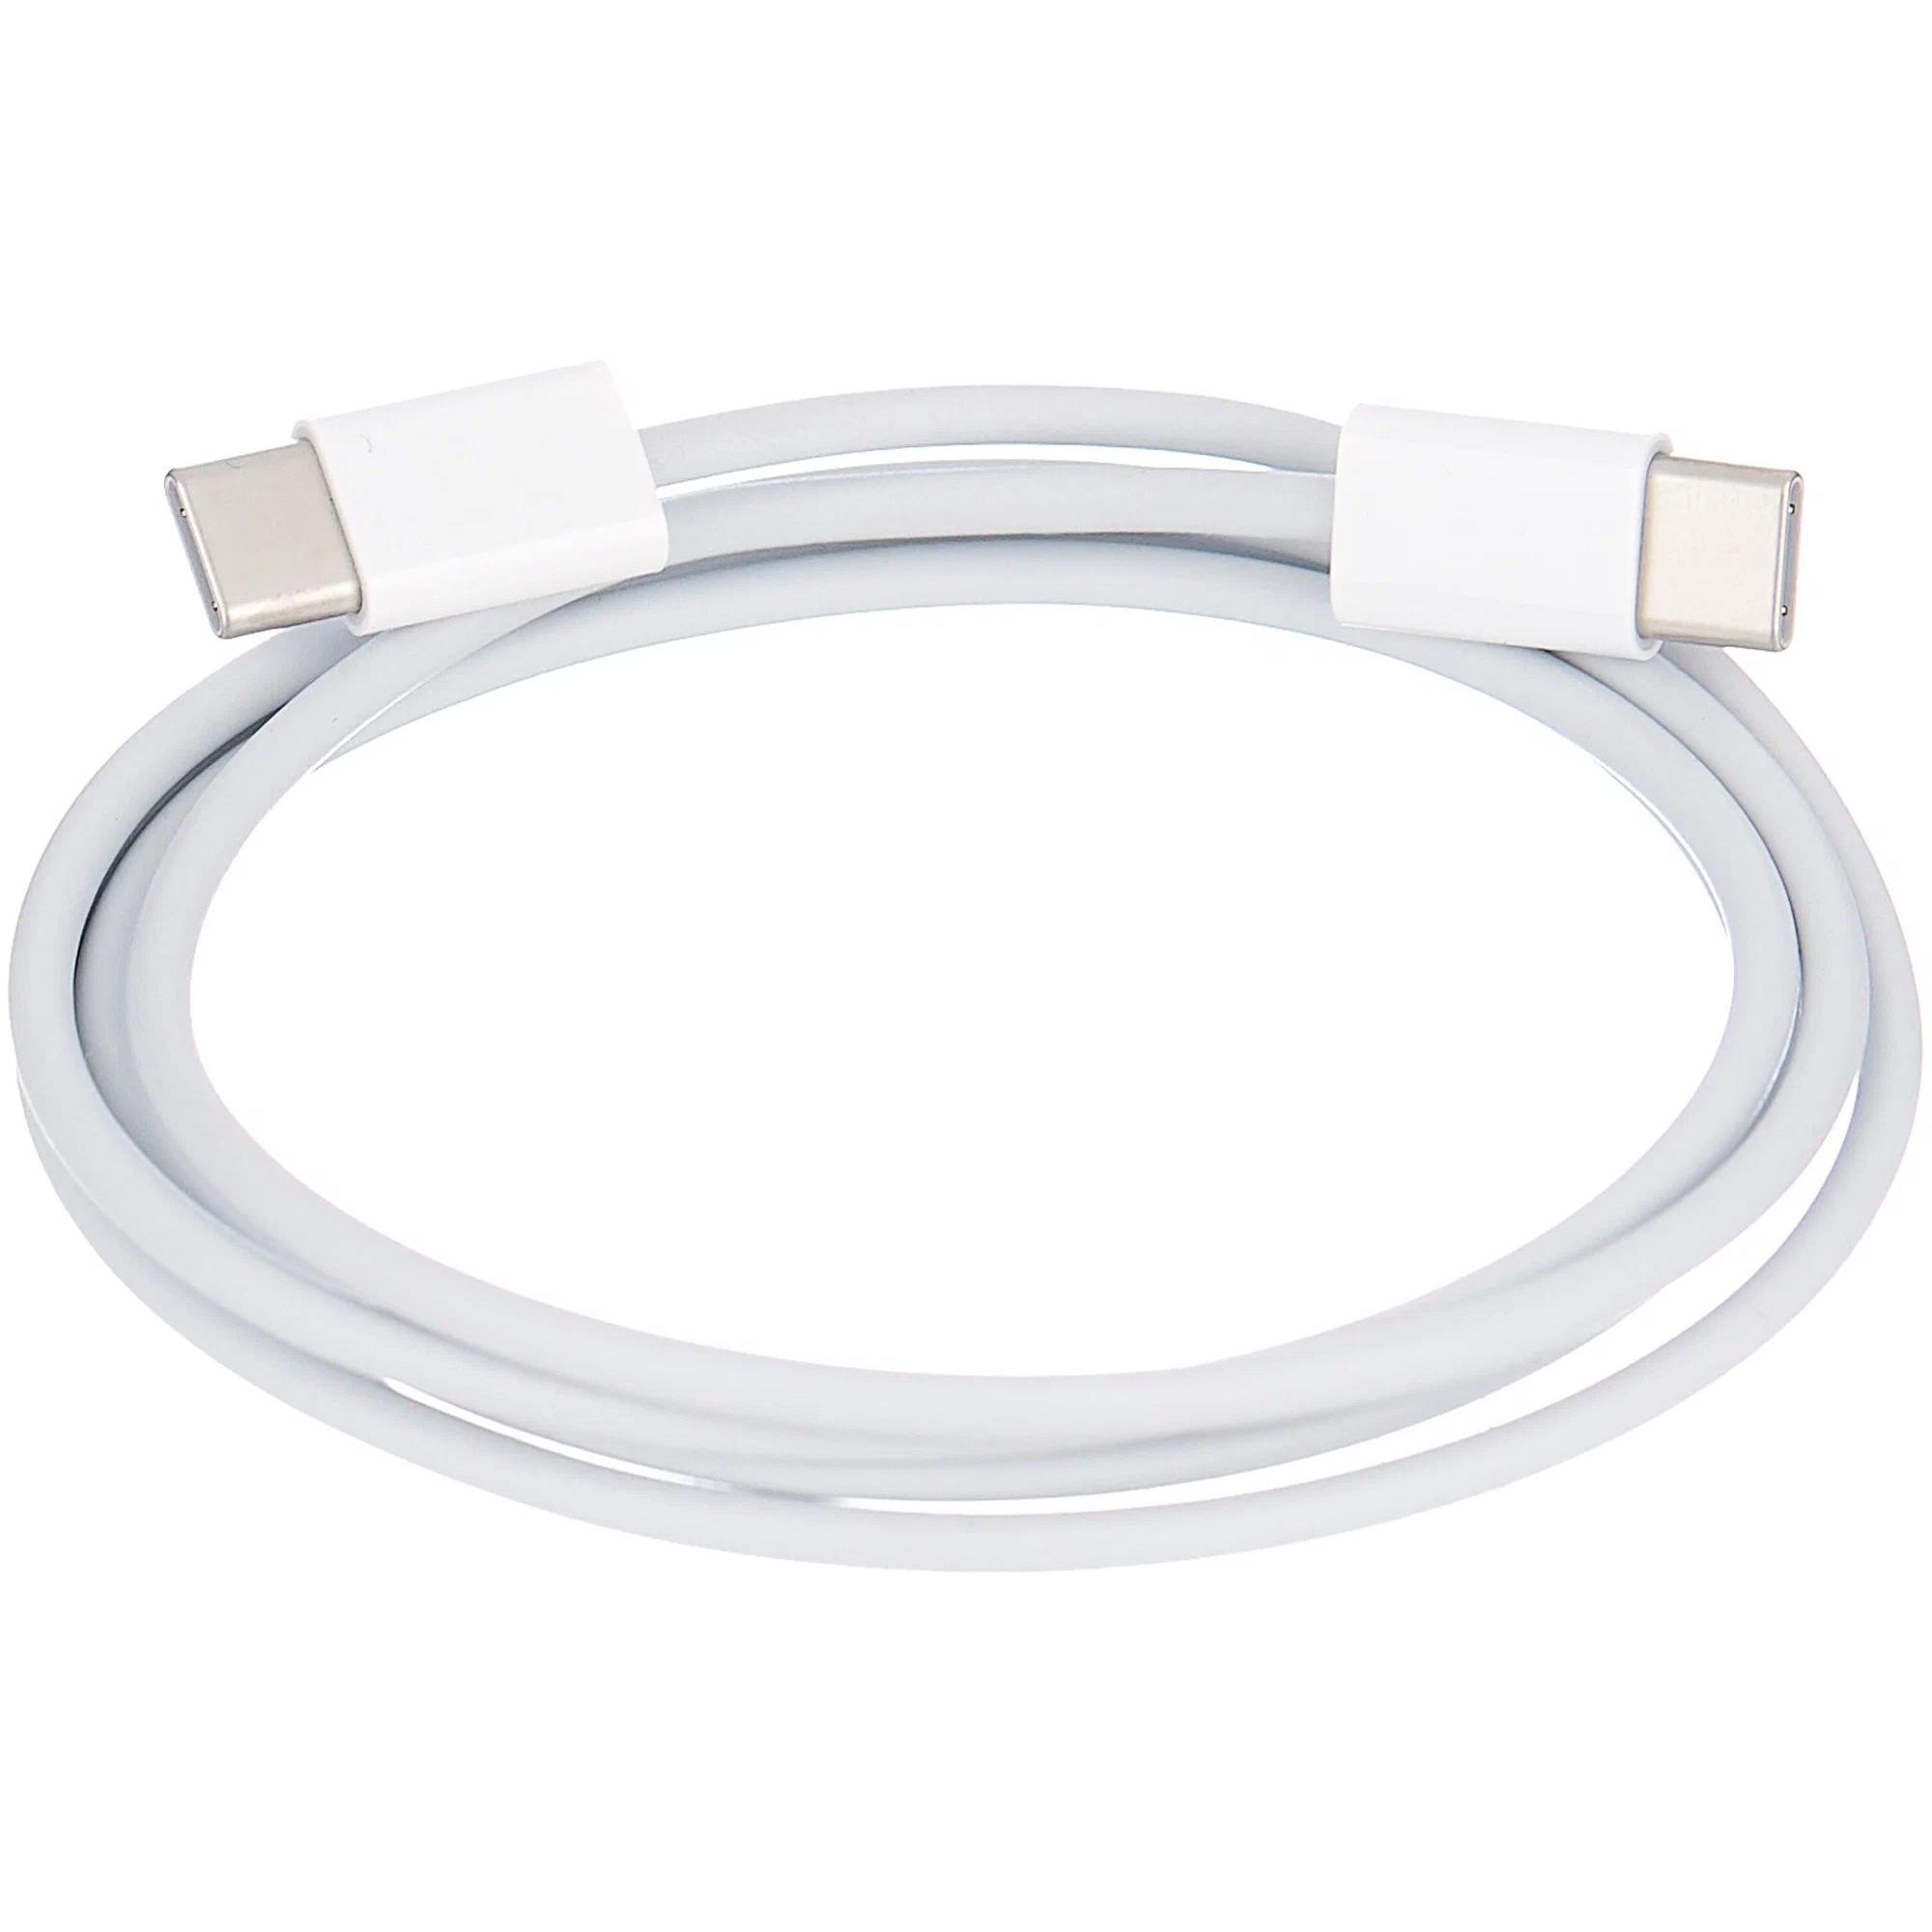 Кабель Apple USB-C Charge Cable (1m) MM093ZM/A